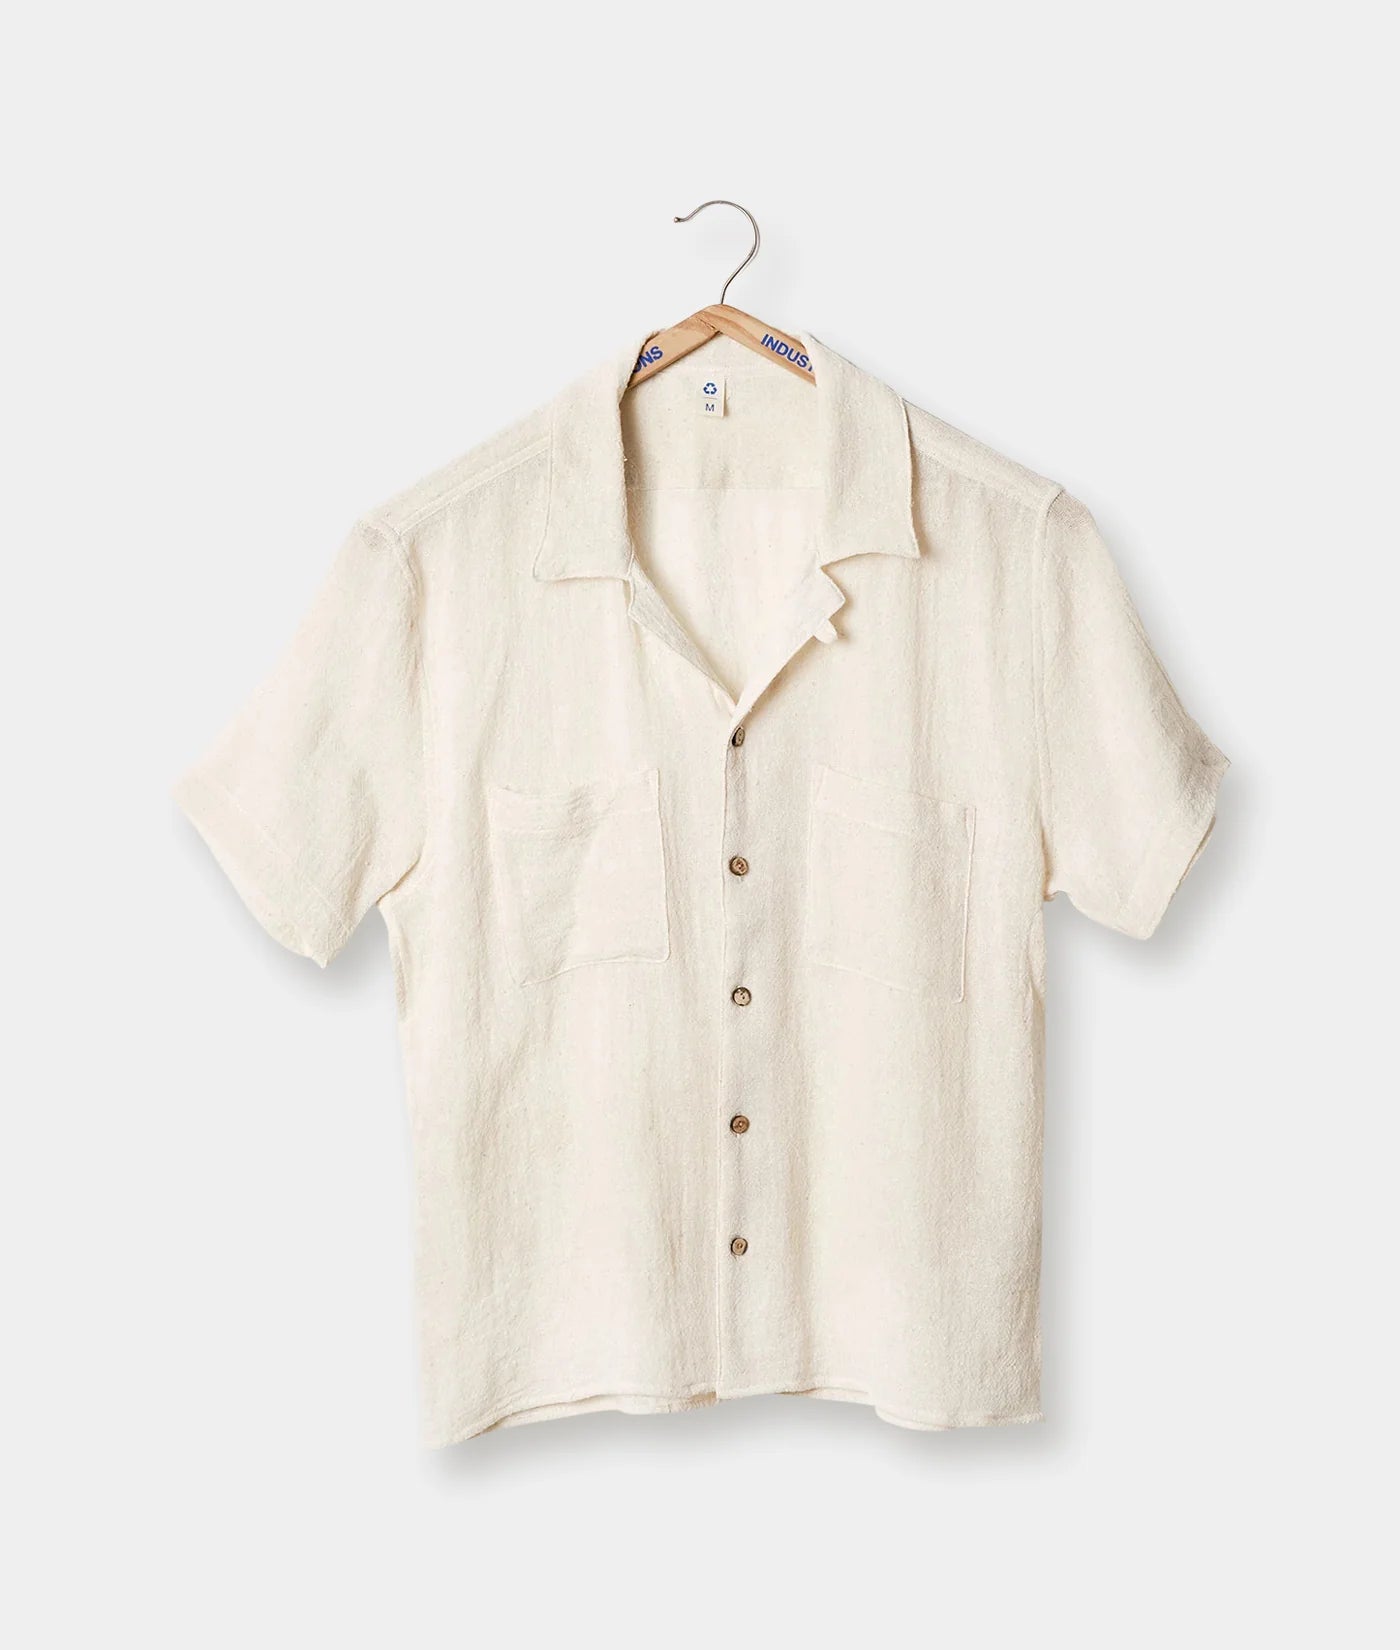 Industry of All Nations New Camp Shirt, Undyed